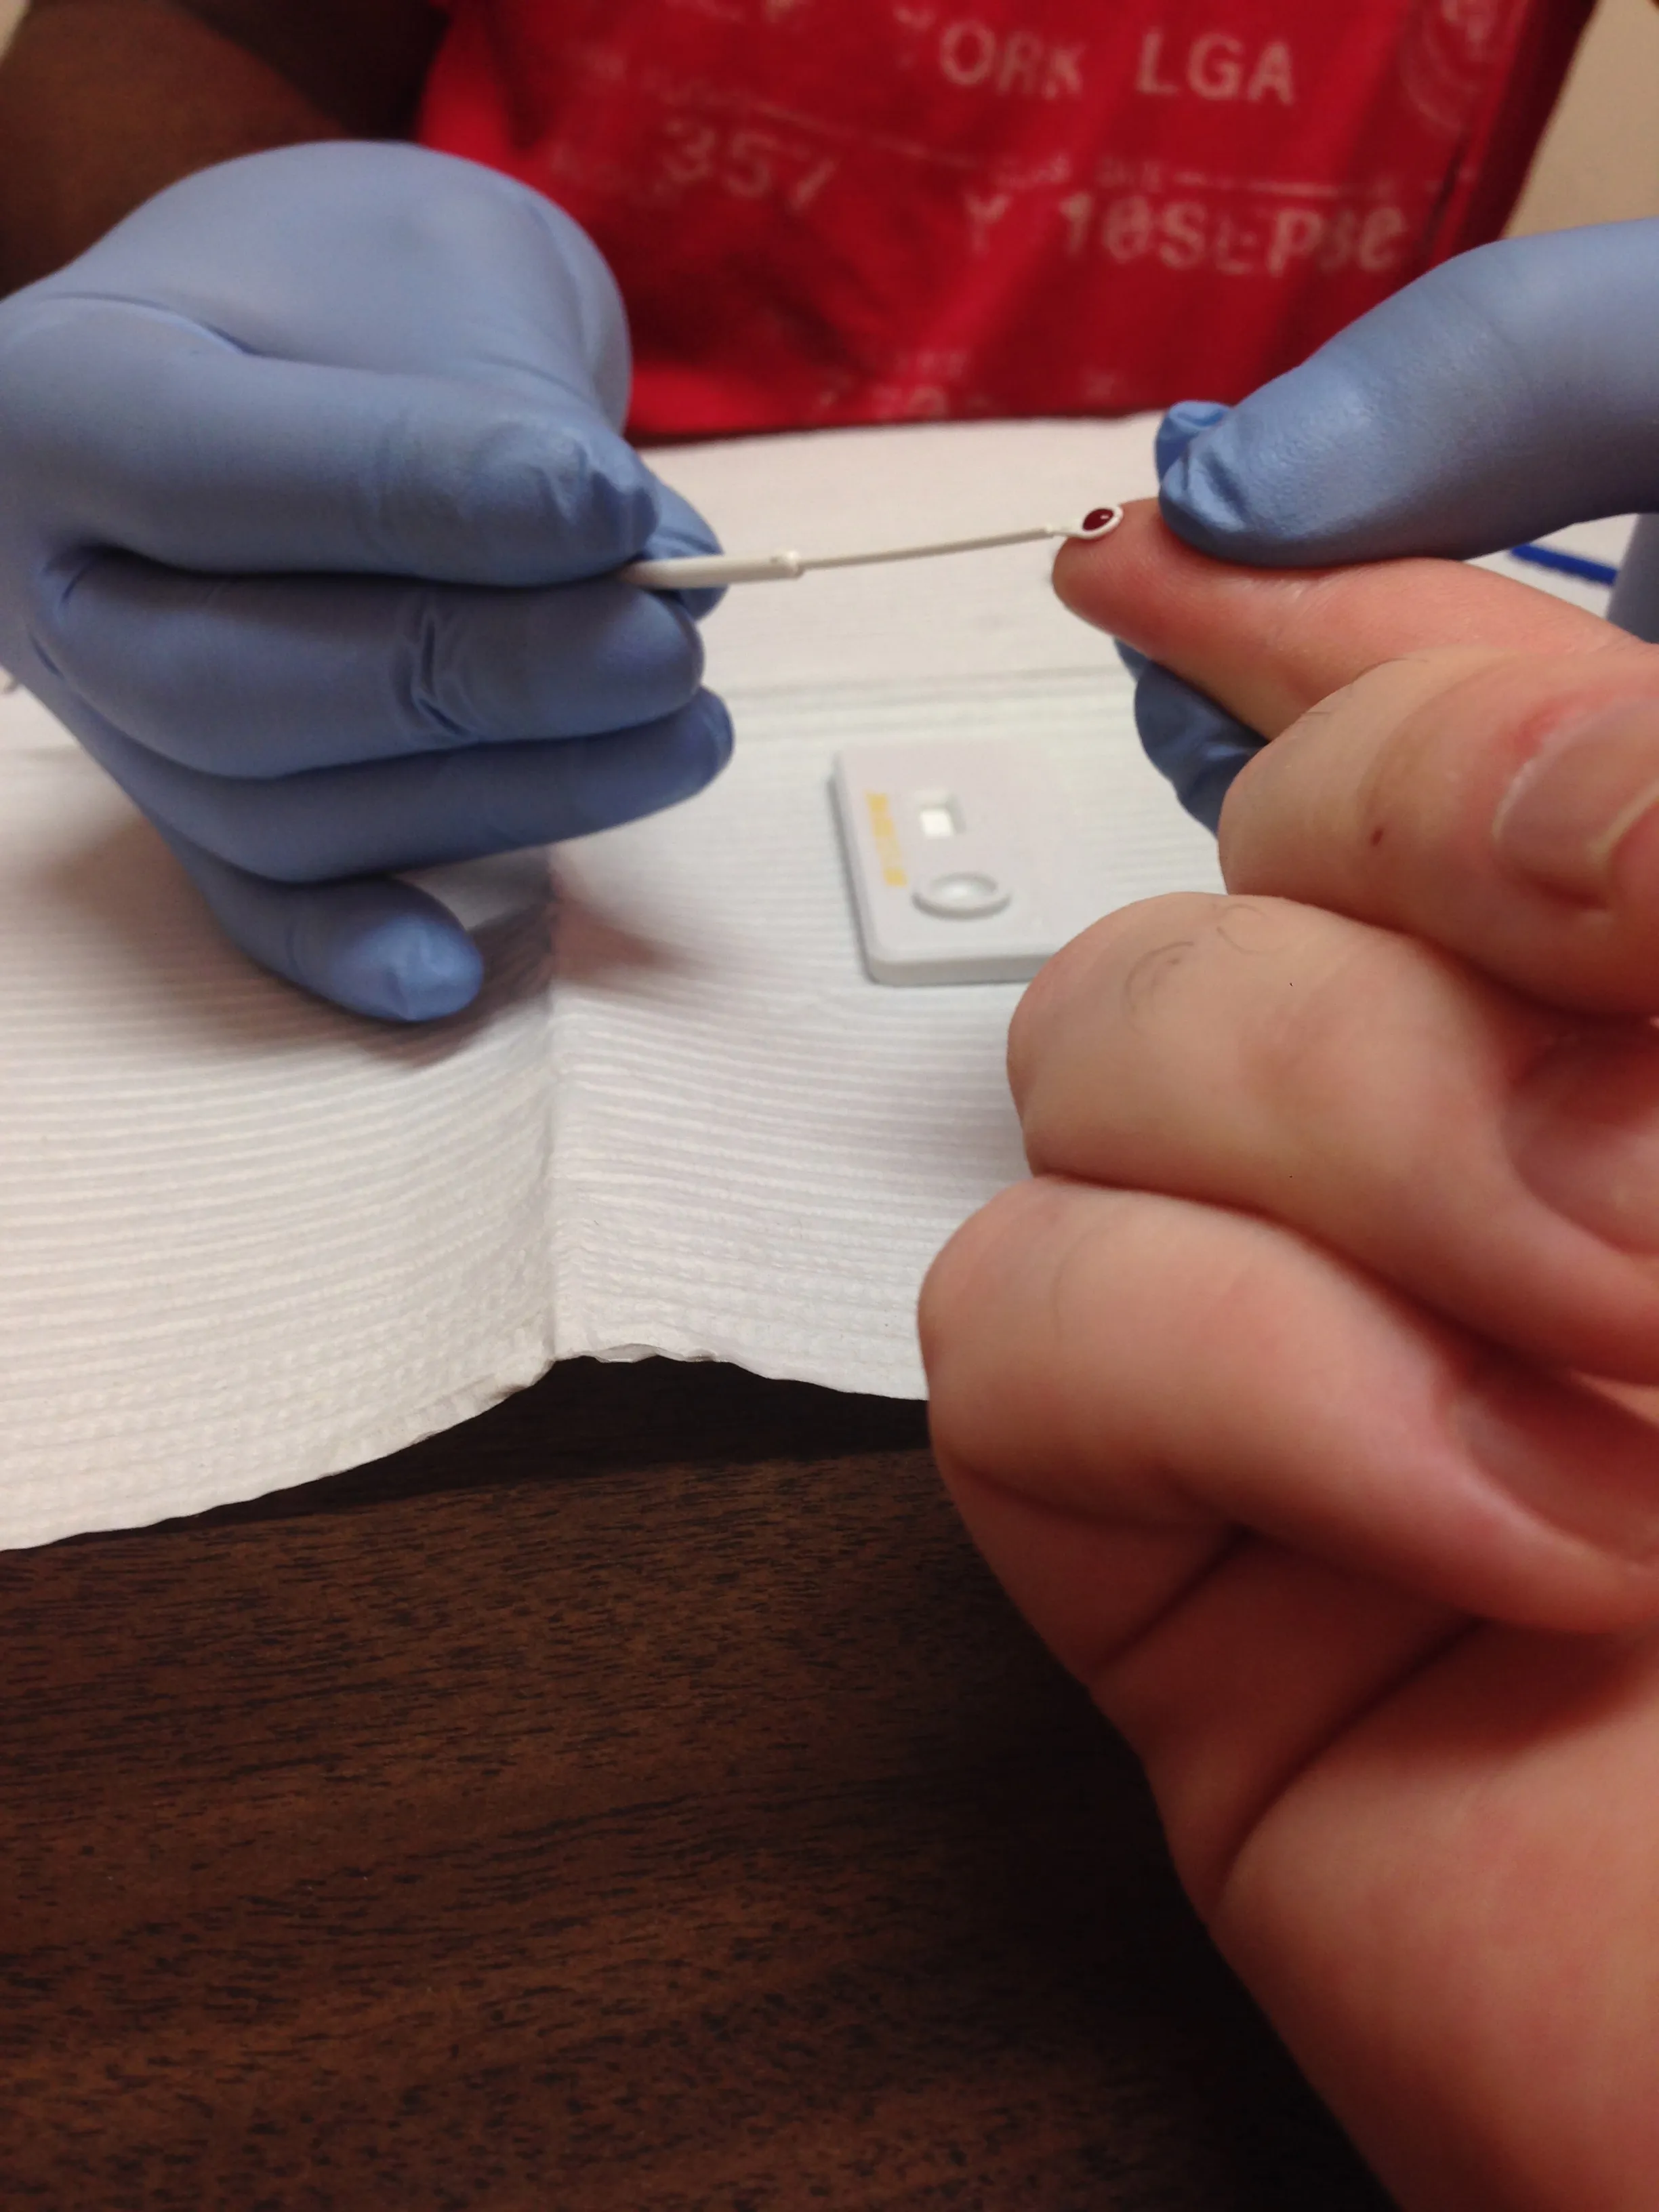 A rapid test kit for HIV being adminstered at a clinic.